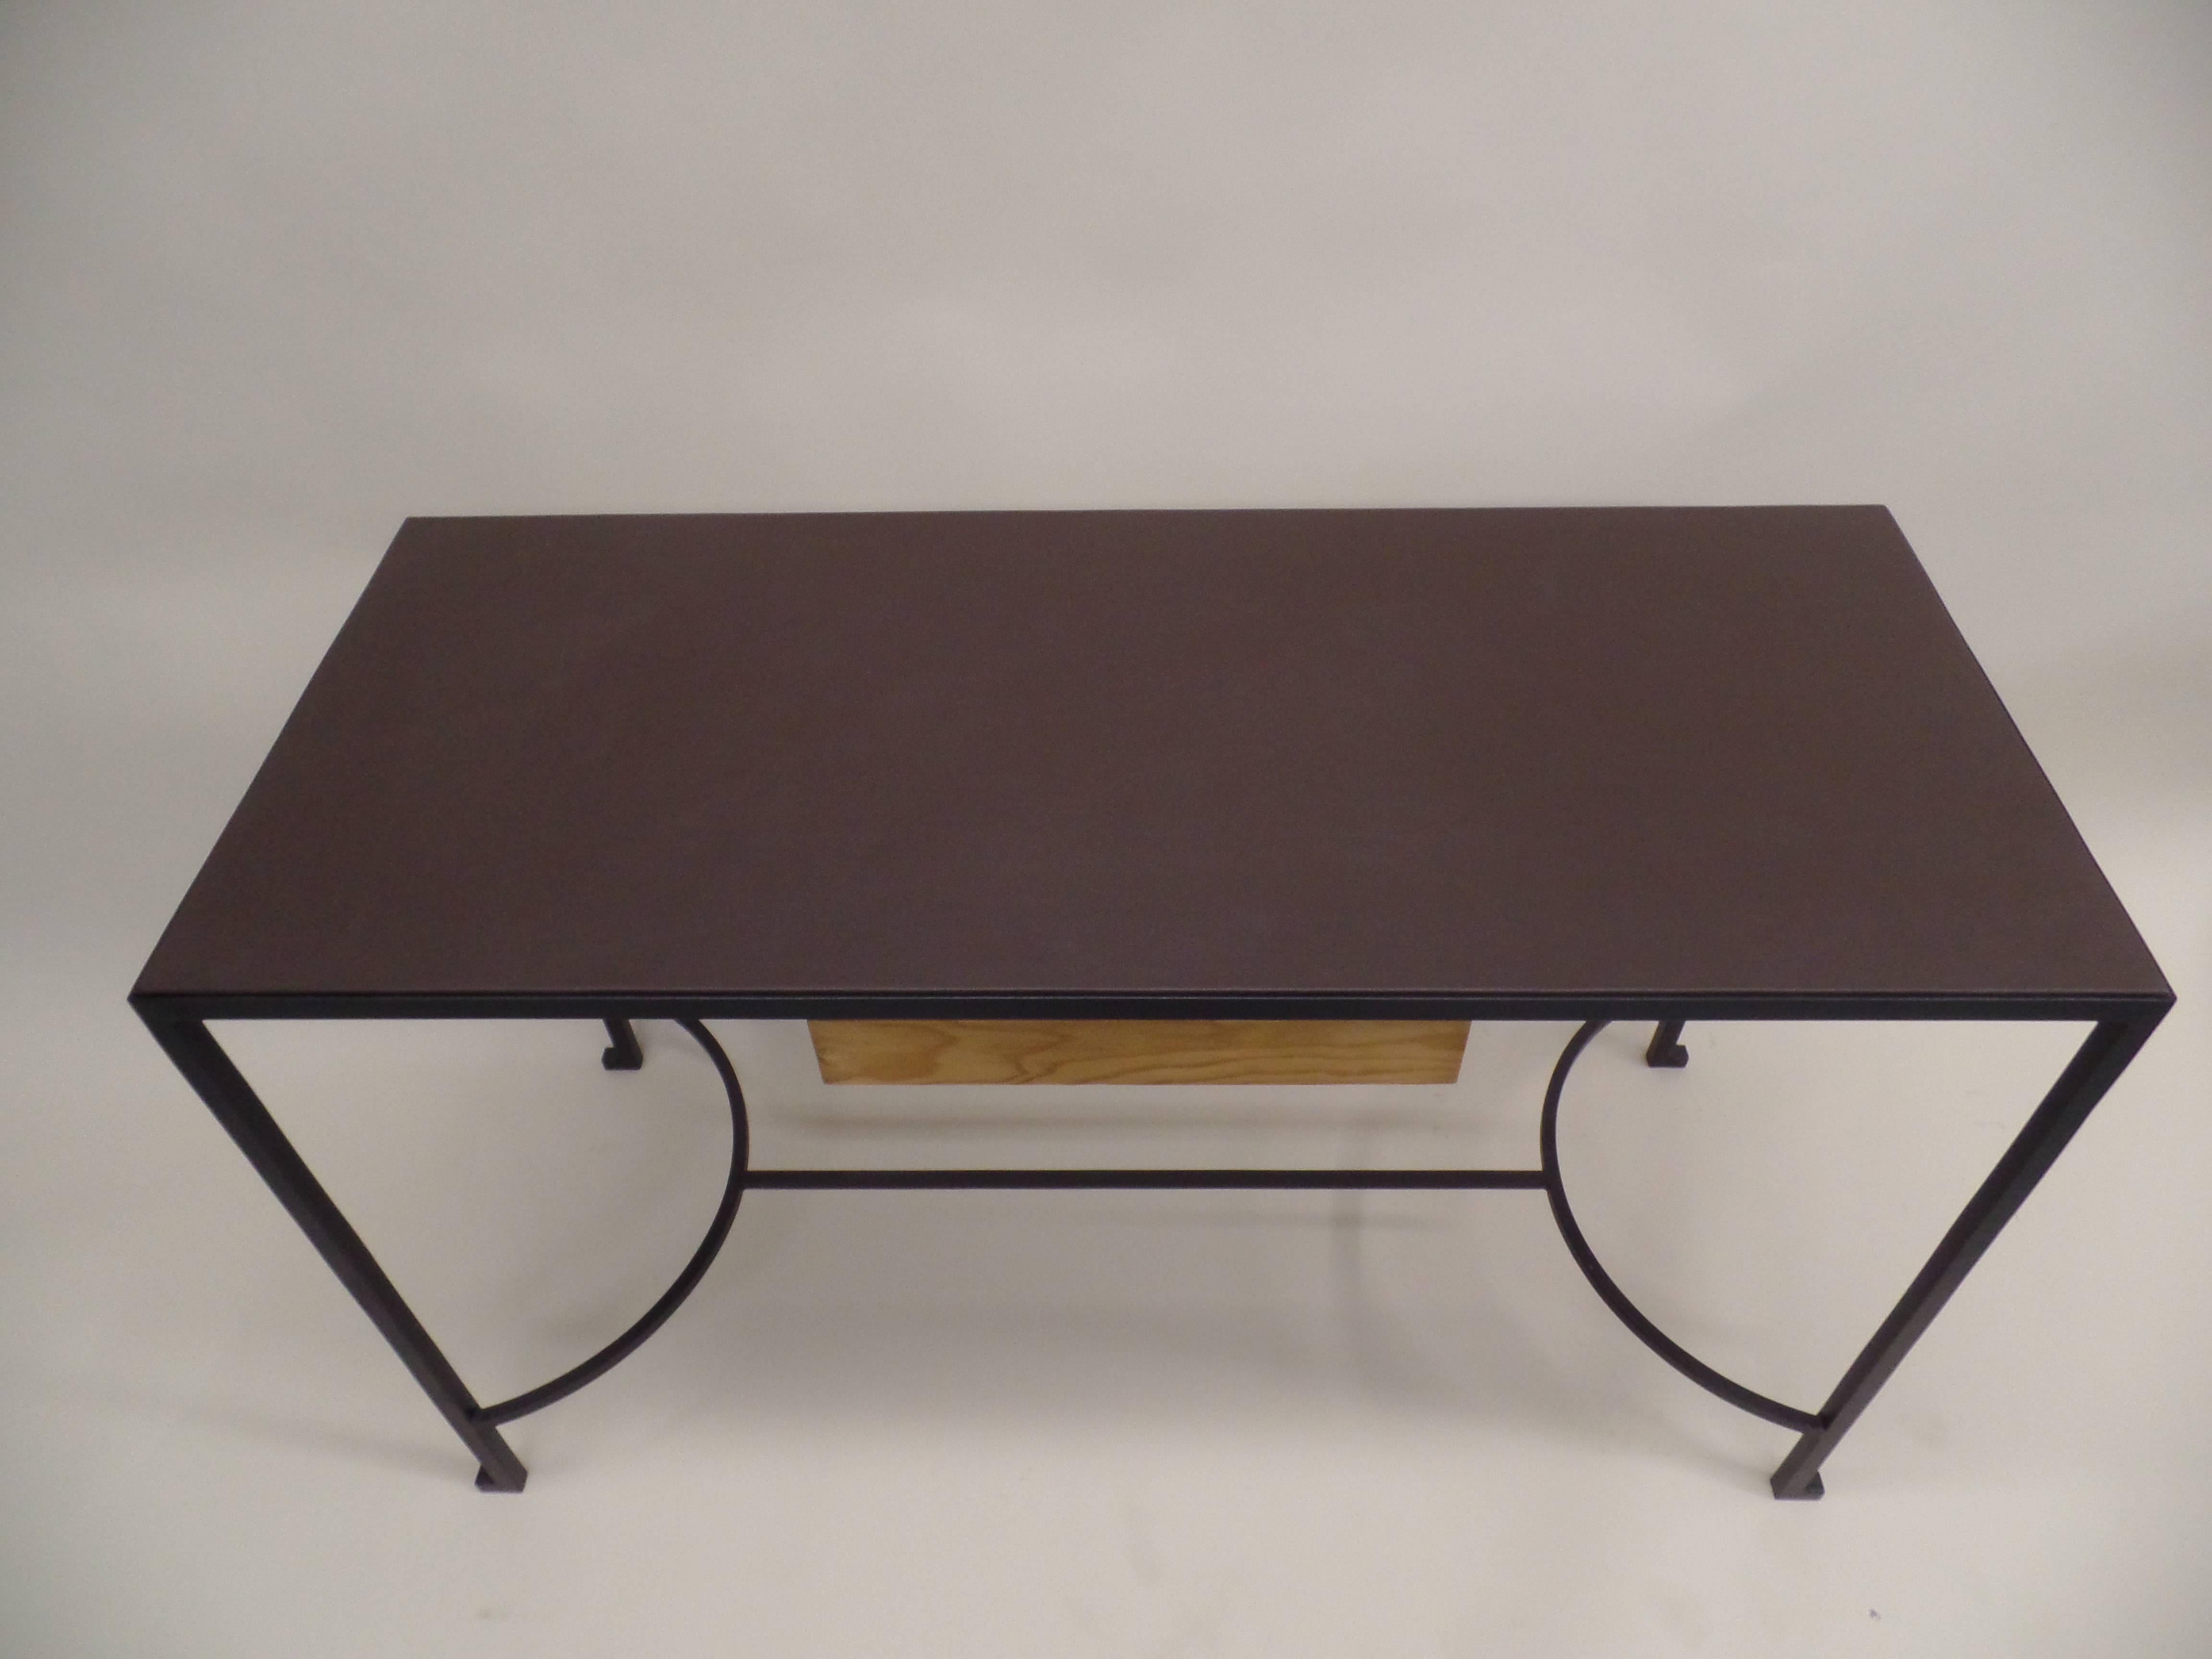 20th Century French Mid-Century Modern Iron & Leather Desk / Console Attr. Marc Duplantier